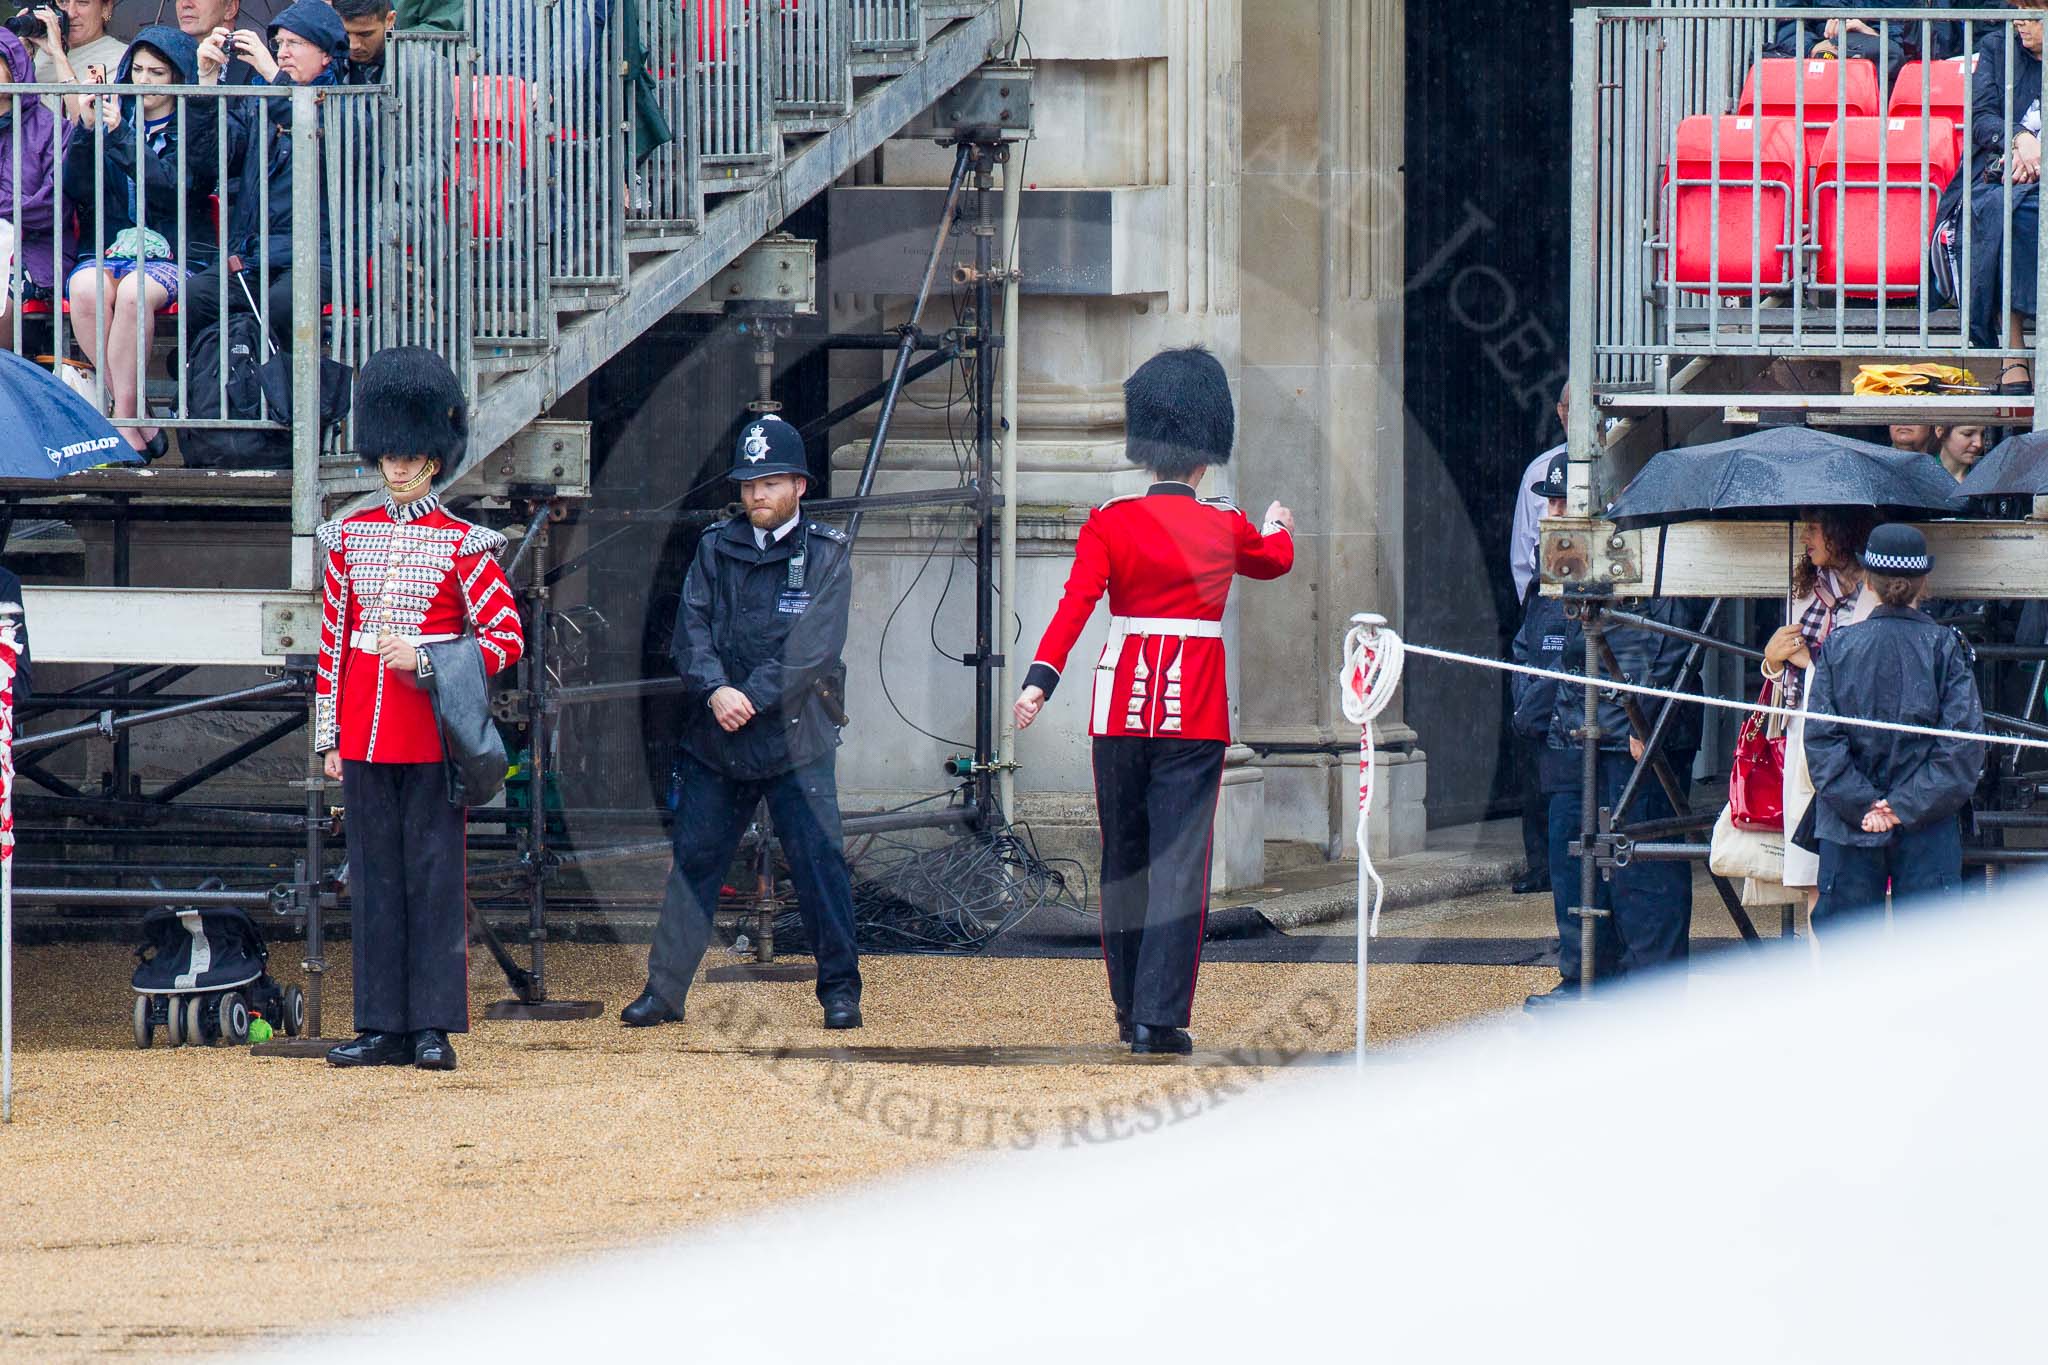 The Colonel's Review 2014.
Horse Guards Parade, Westminster,
London,

United Kingdom,
on 07 June 2014 at 11:16, image #375